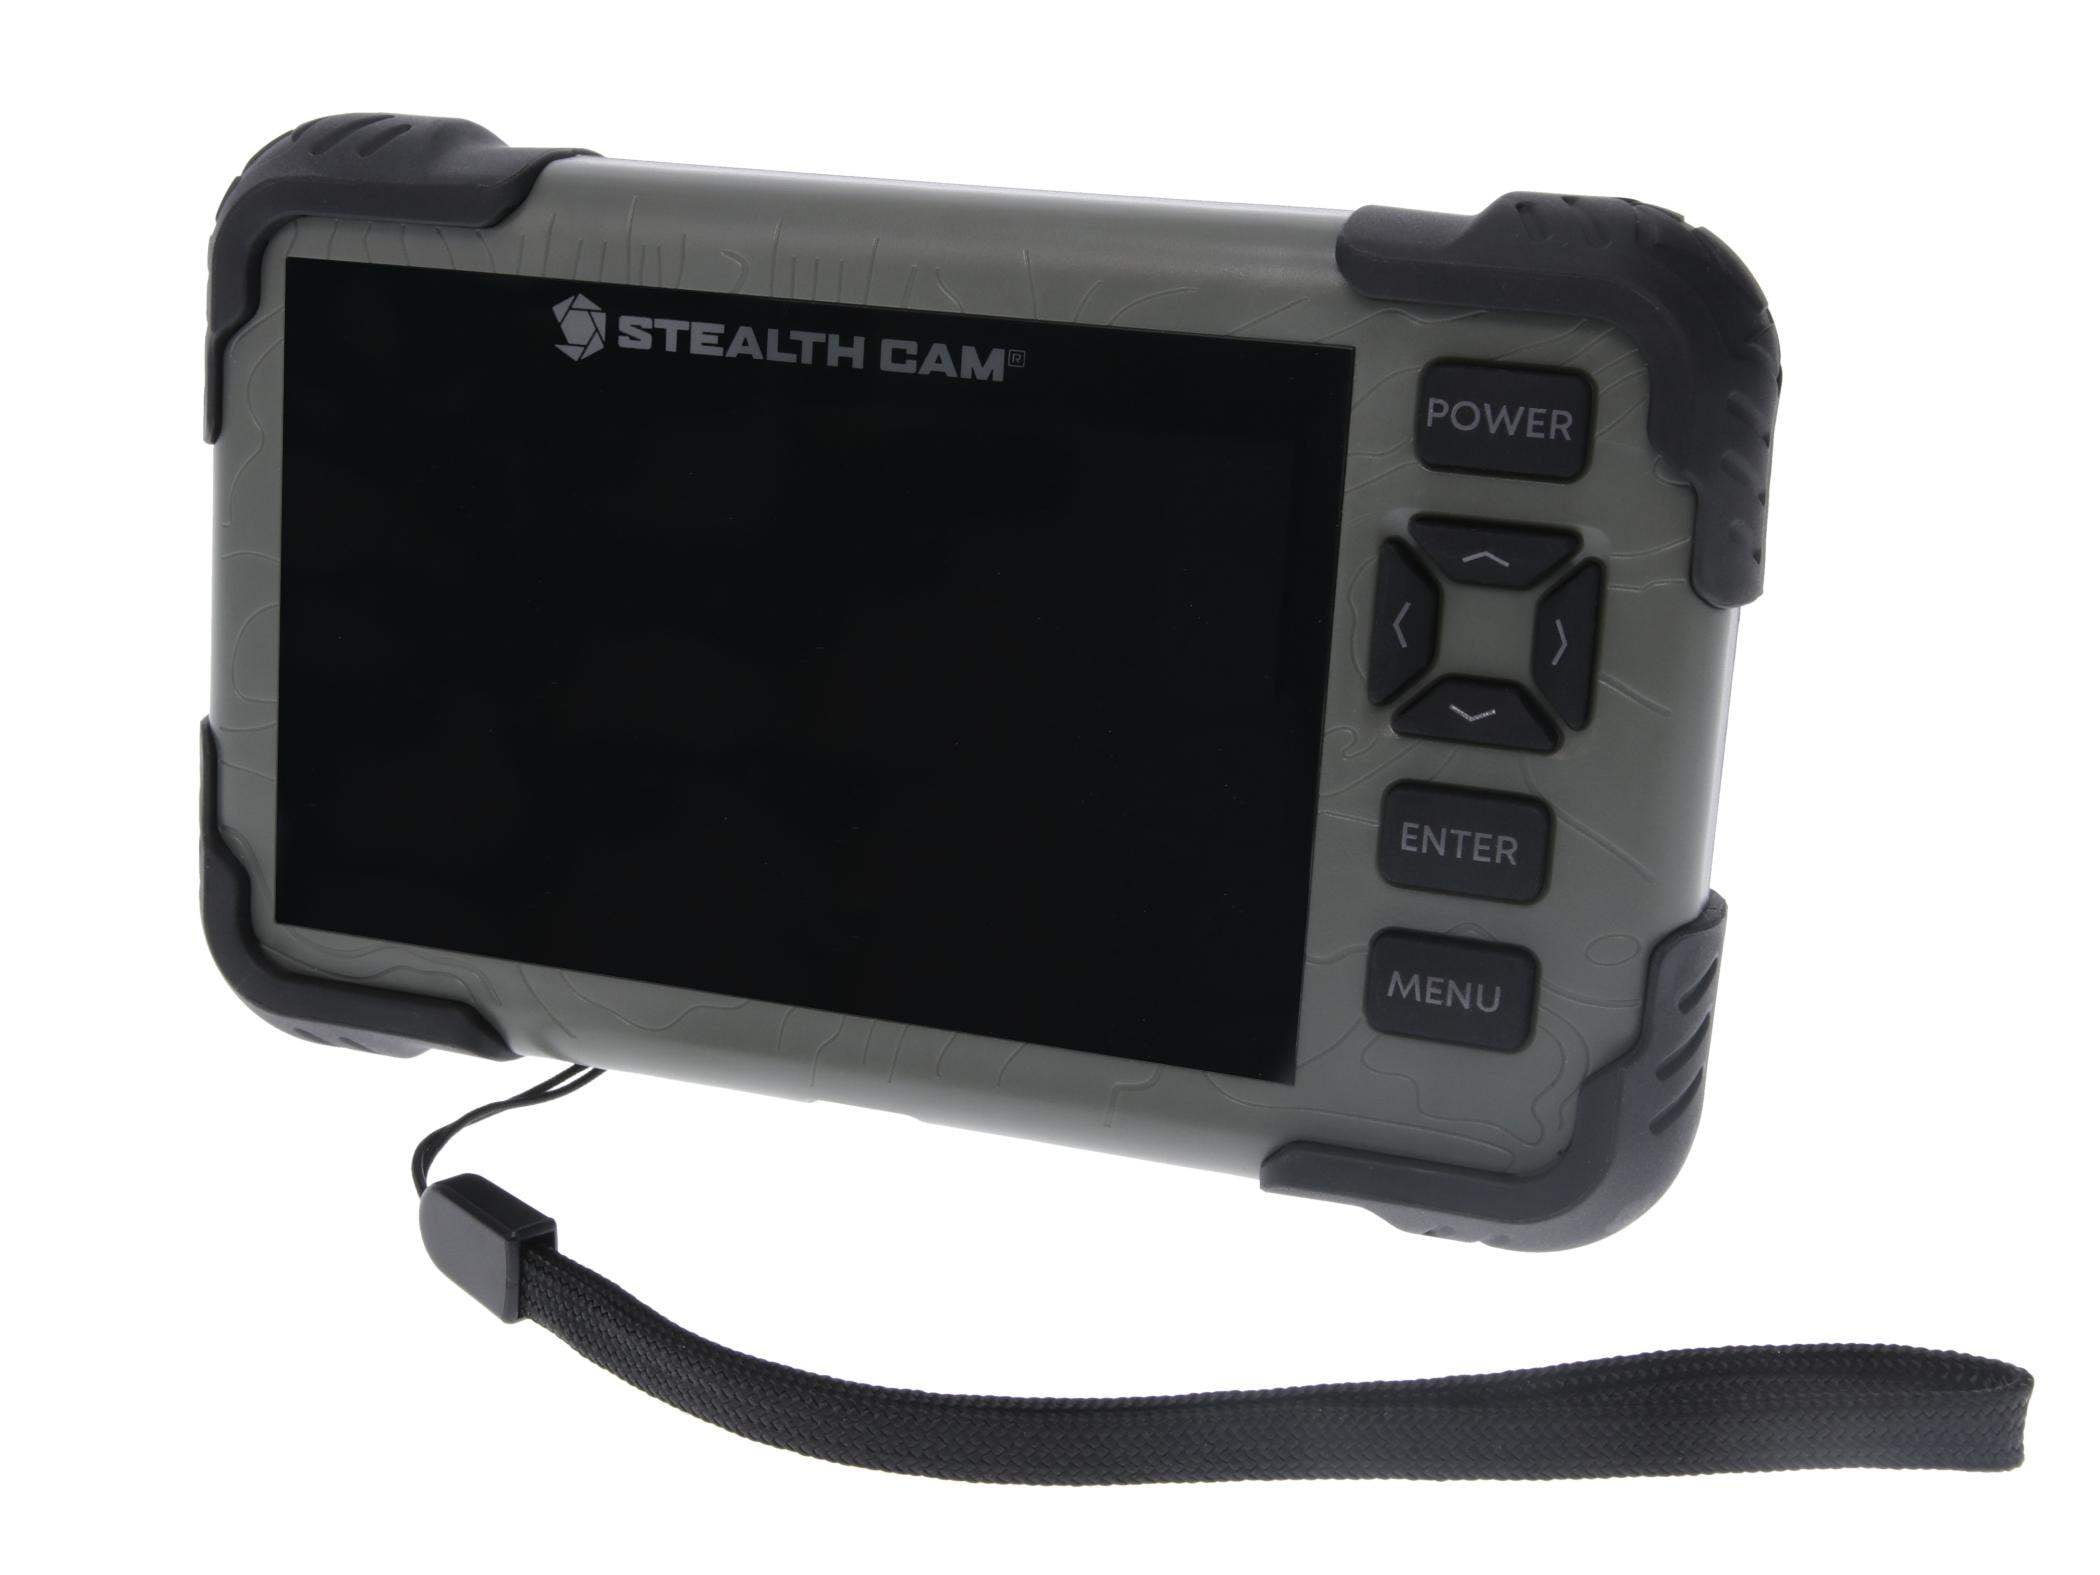 Stealth Cam Memory Card Storage Case Holds 12 SD Cards for sale online 